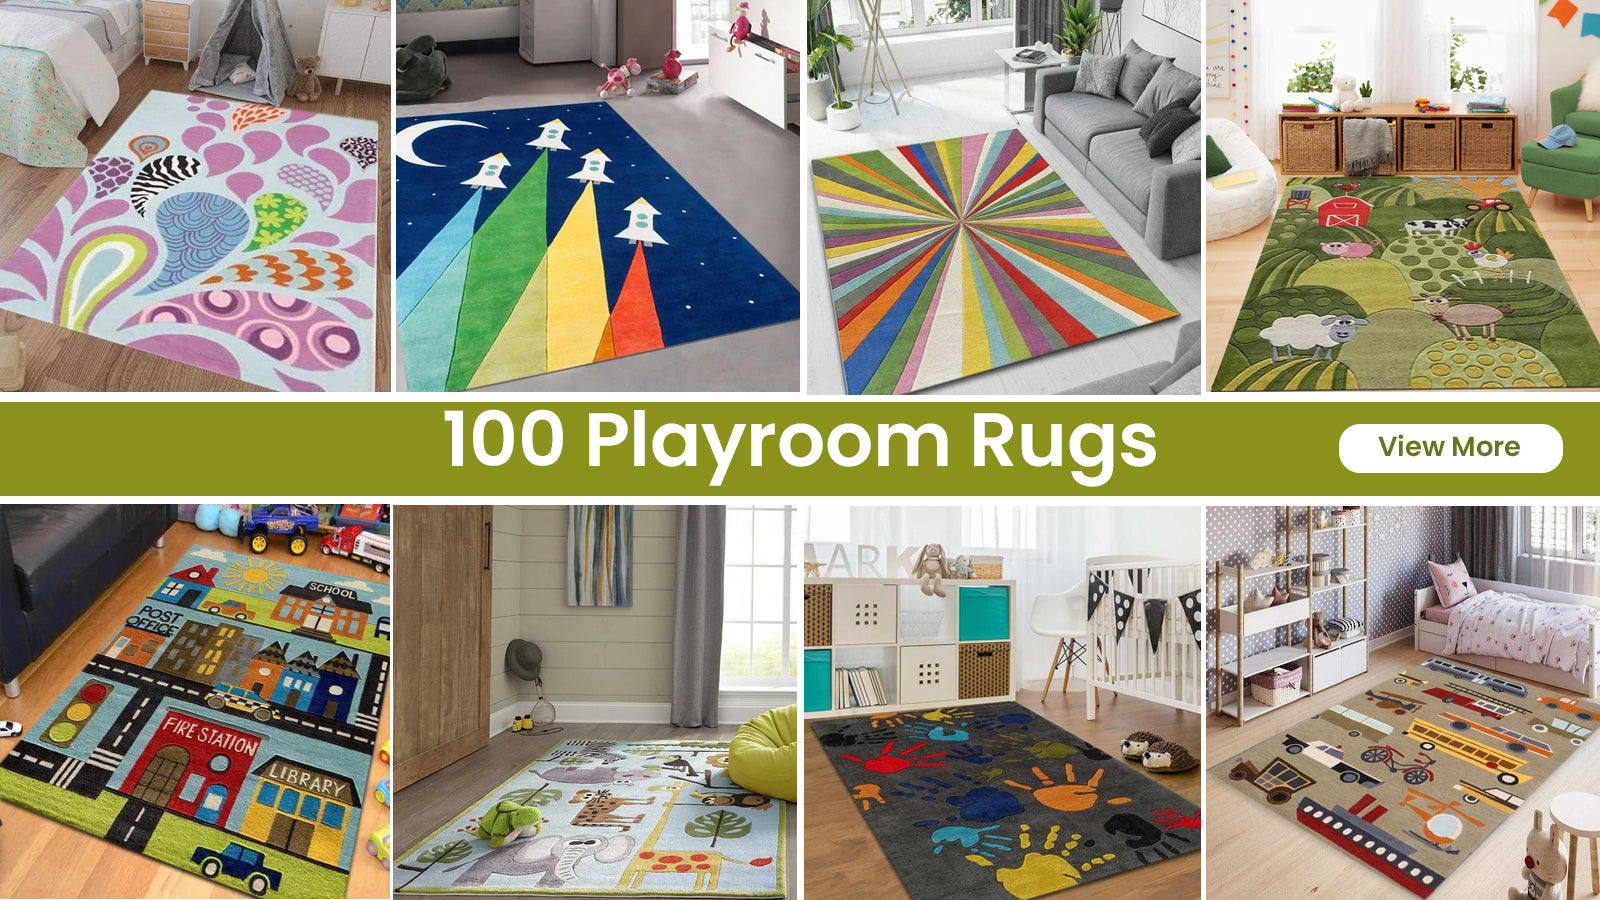 8 Tips To Choose The Right Kids Room Rug